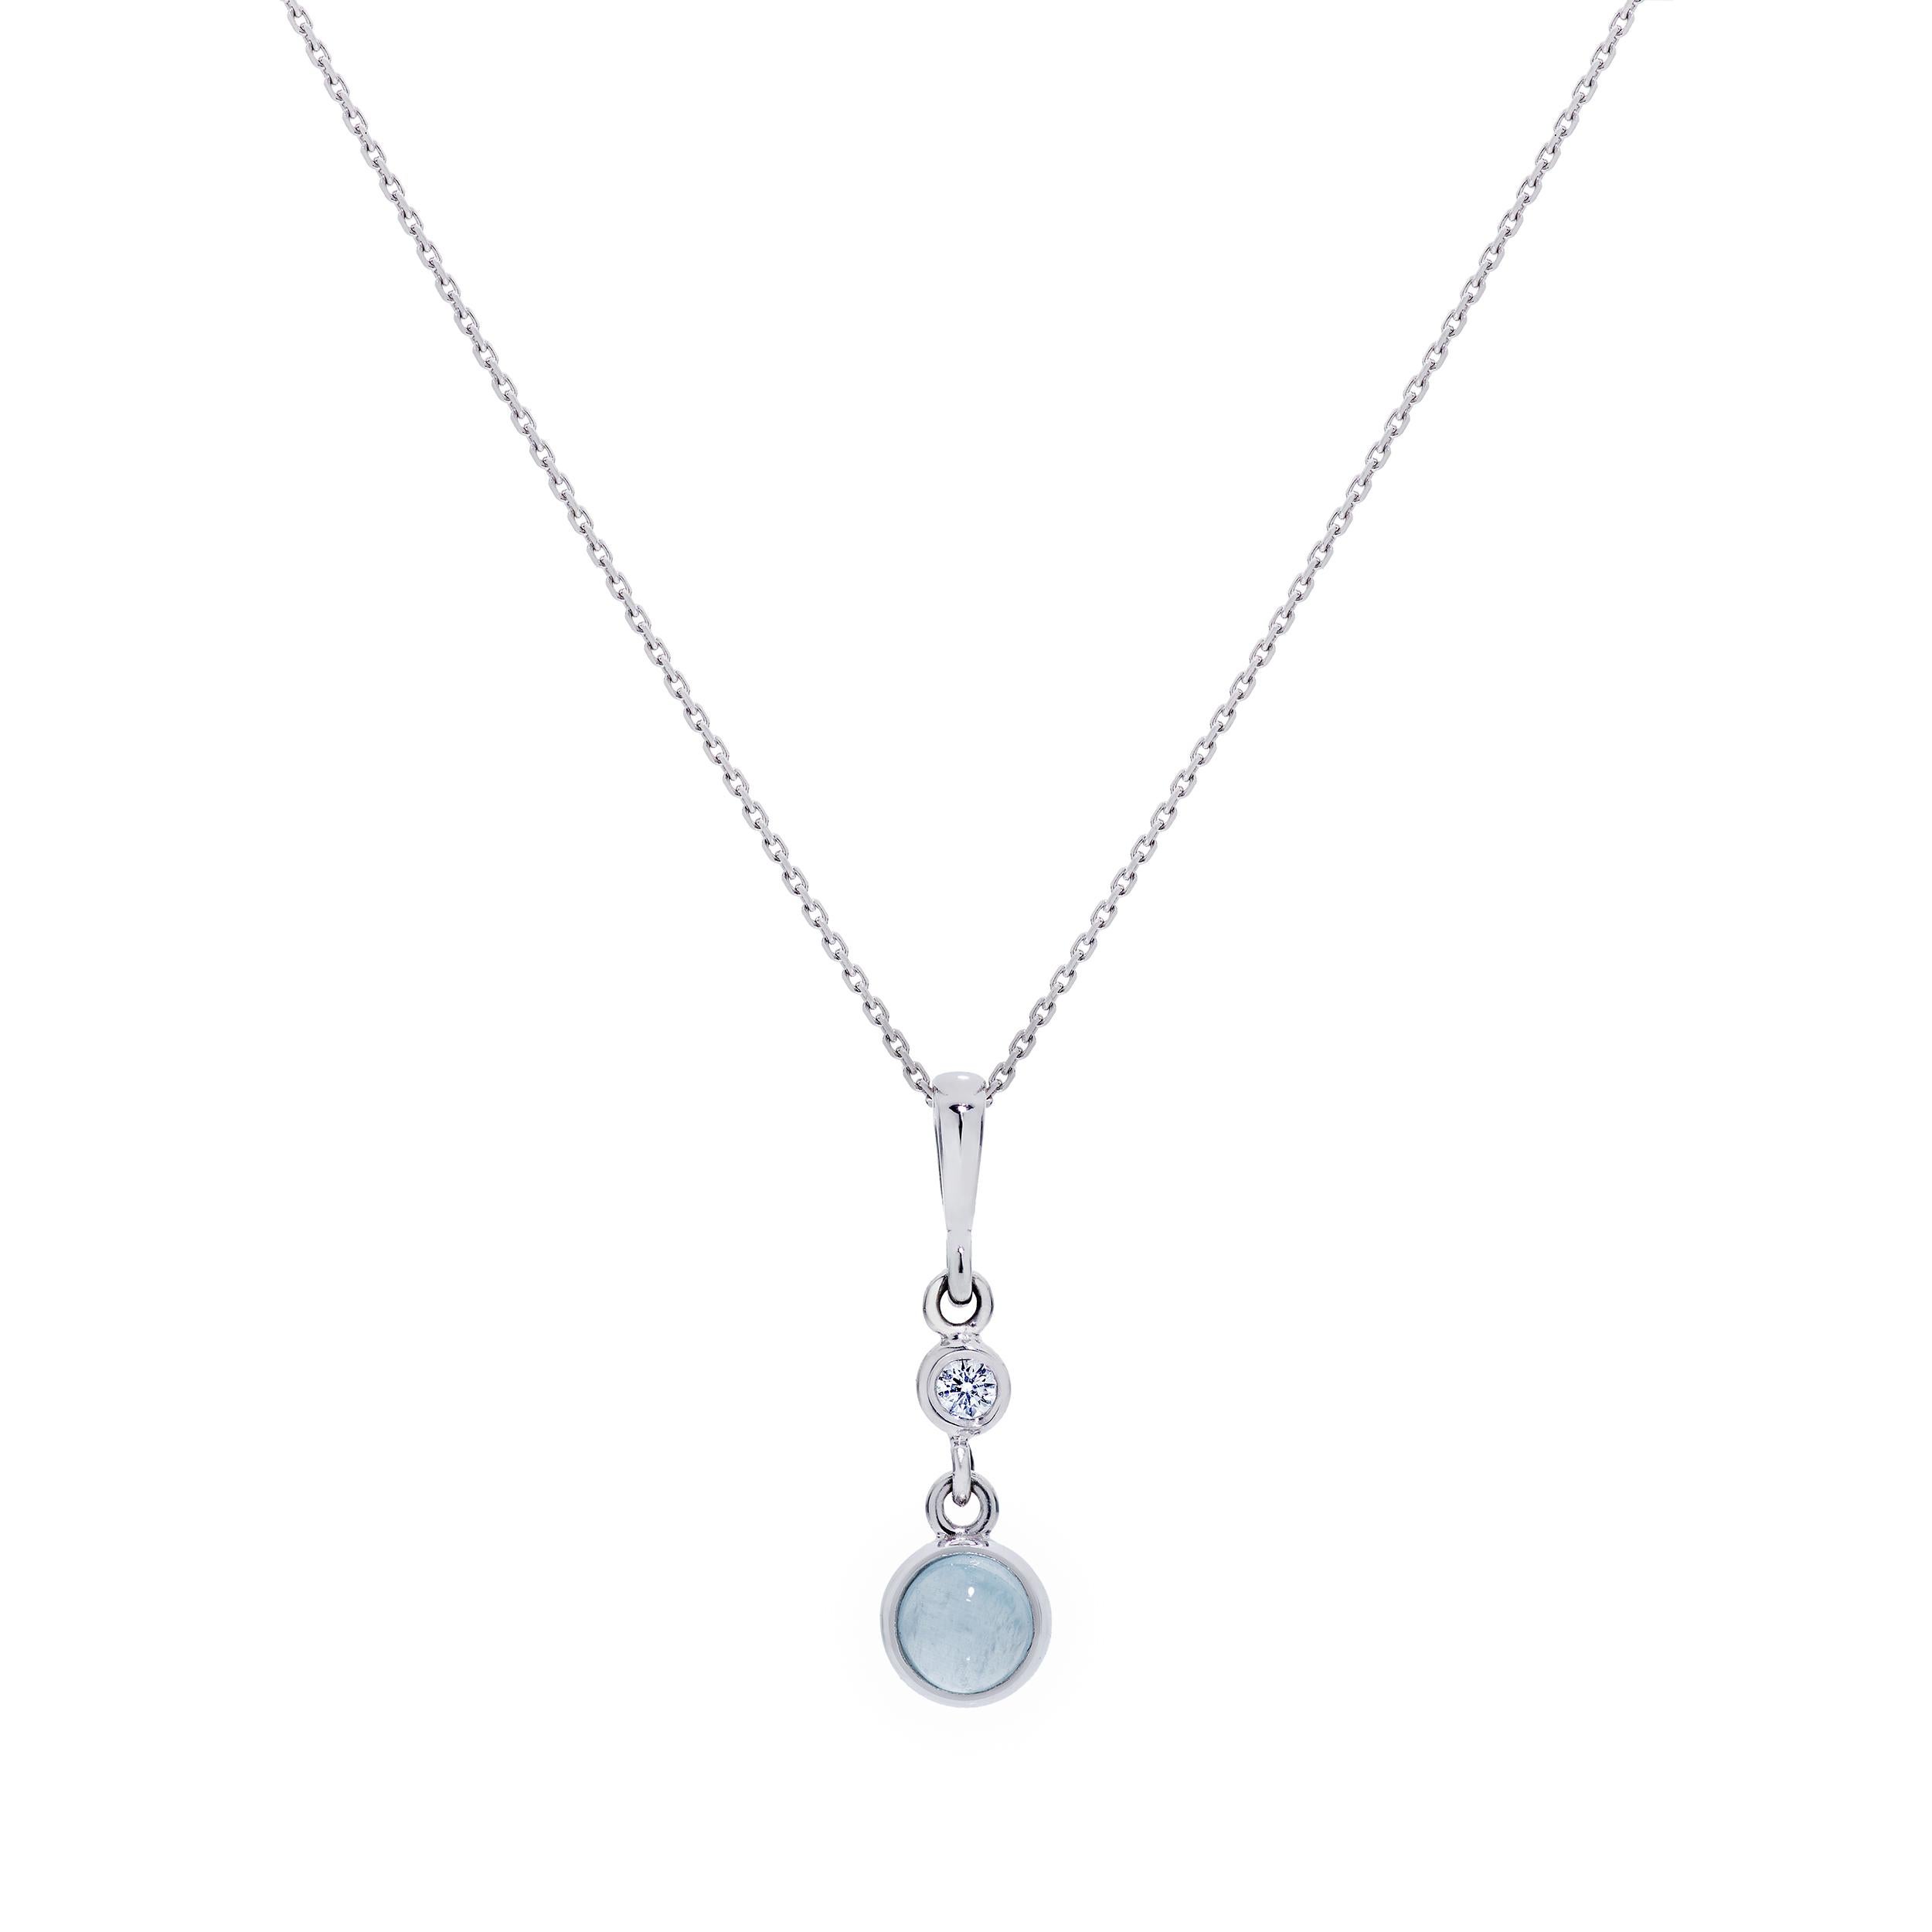 What a precious and perfect set that could also be given as 2 gifts across more than one occasion.  

1.20 Carats of Round Cabochon Aquamarine
0.30 Carats of Round Brilliant Diamonds
Set in 18 Karat White Gold
Chain is 18